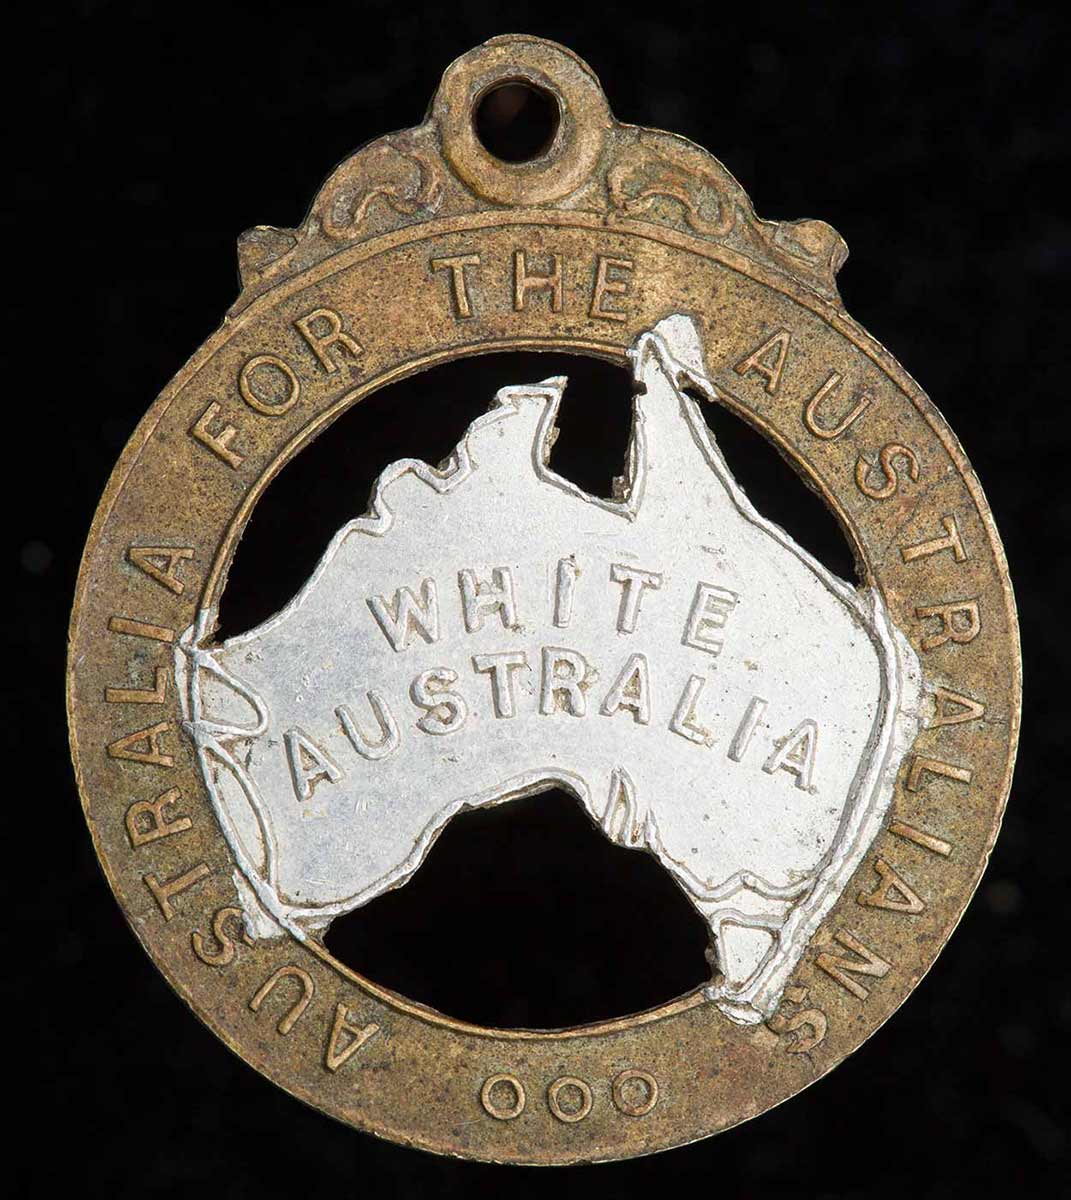 This 28mm-high badge has the words ‘Australia for the Australians’ stamped on the rim and the words ‘White Australia’ stamped on silver-painted representation of the Australian continent in the middle. - click to view larger image